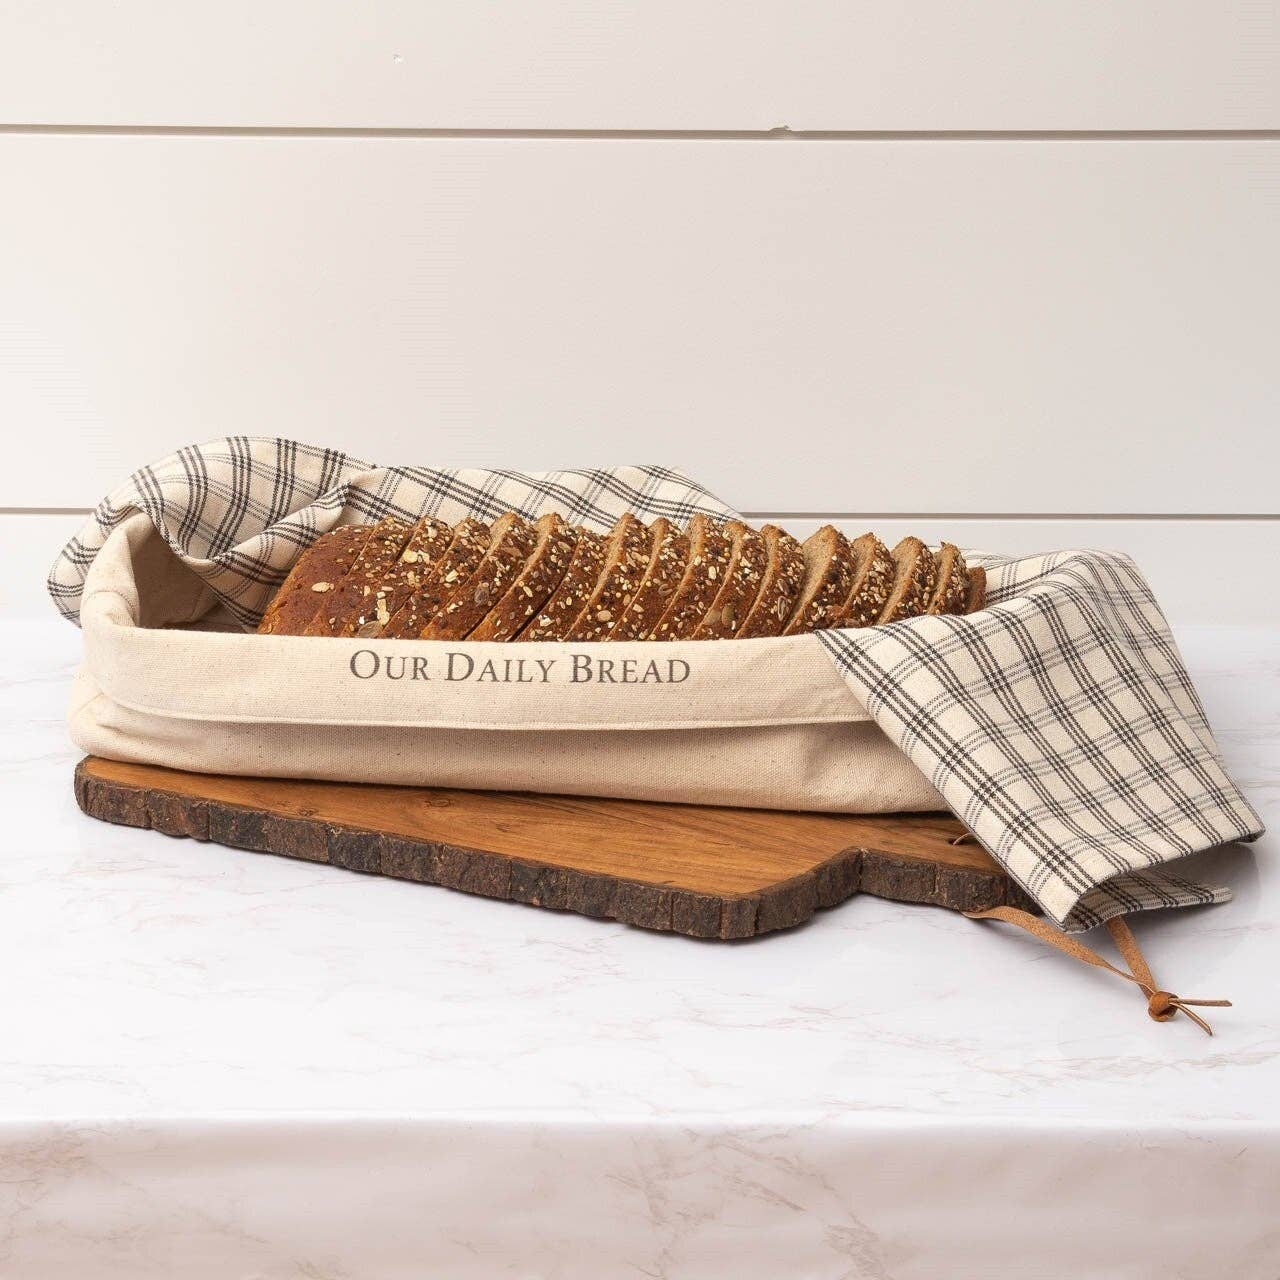 Fabric Bread Basket - Our Daily Bread, with Cover (SET)